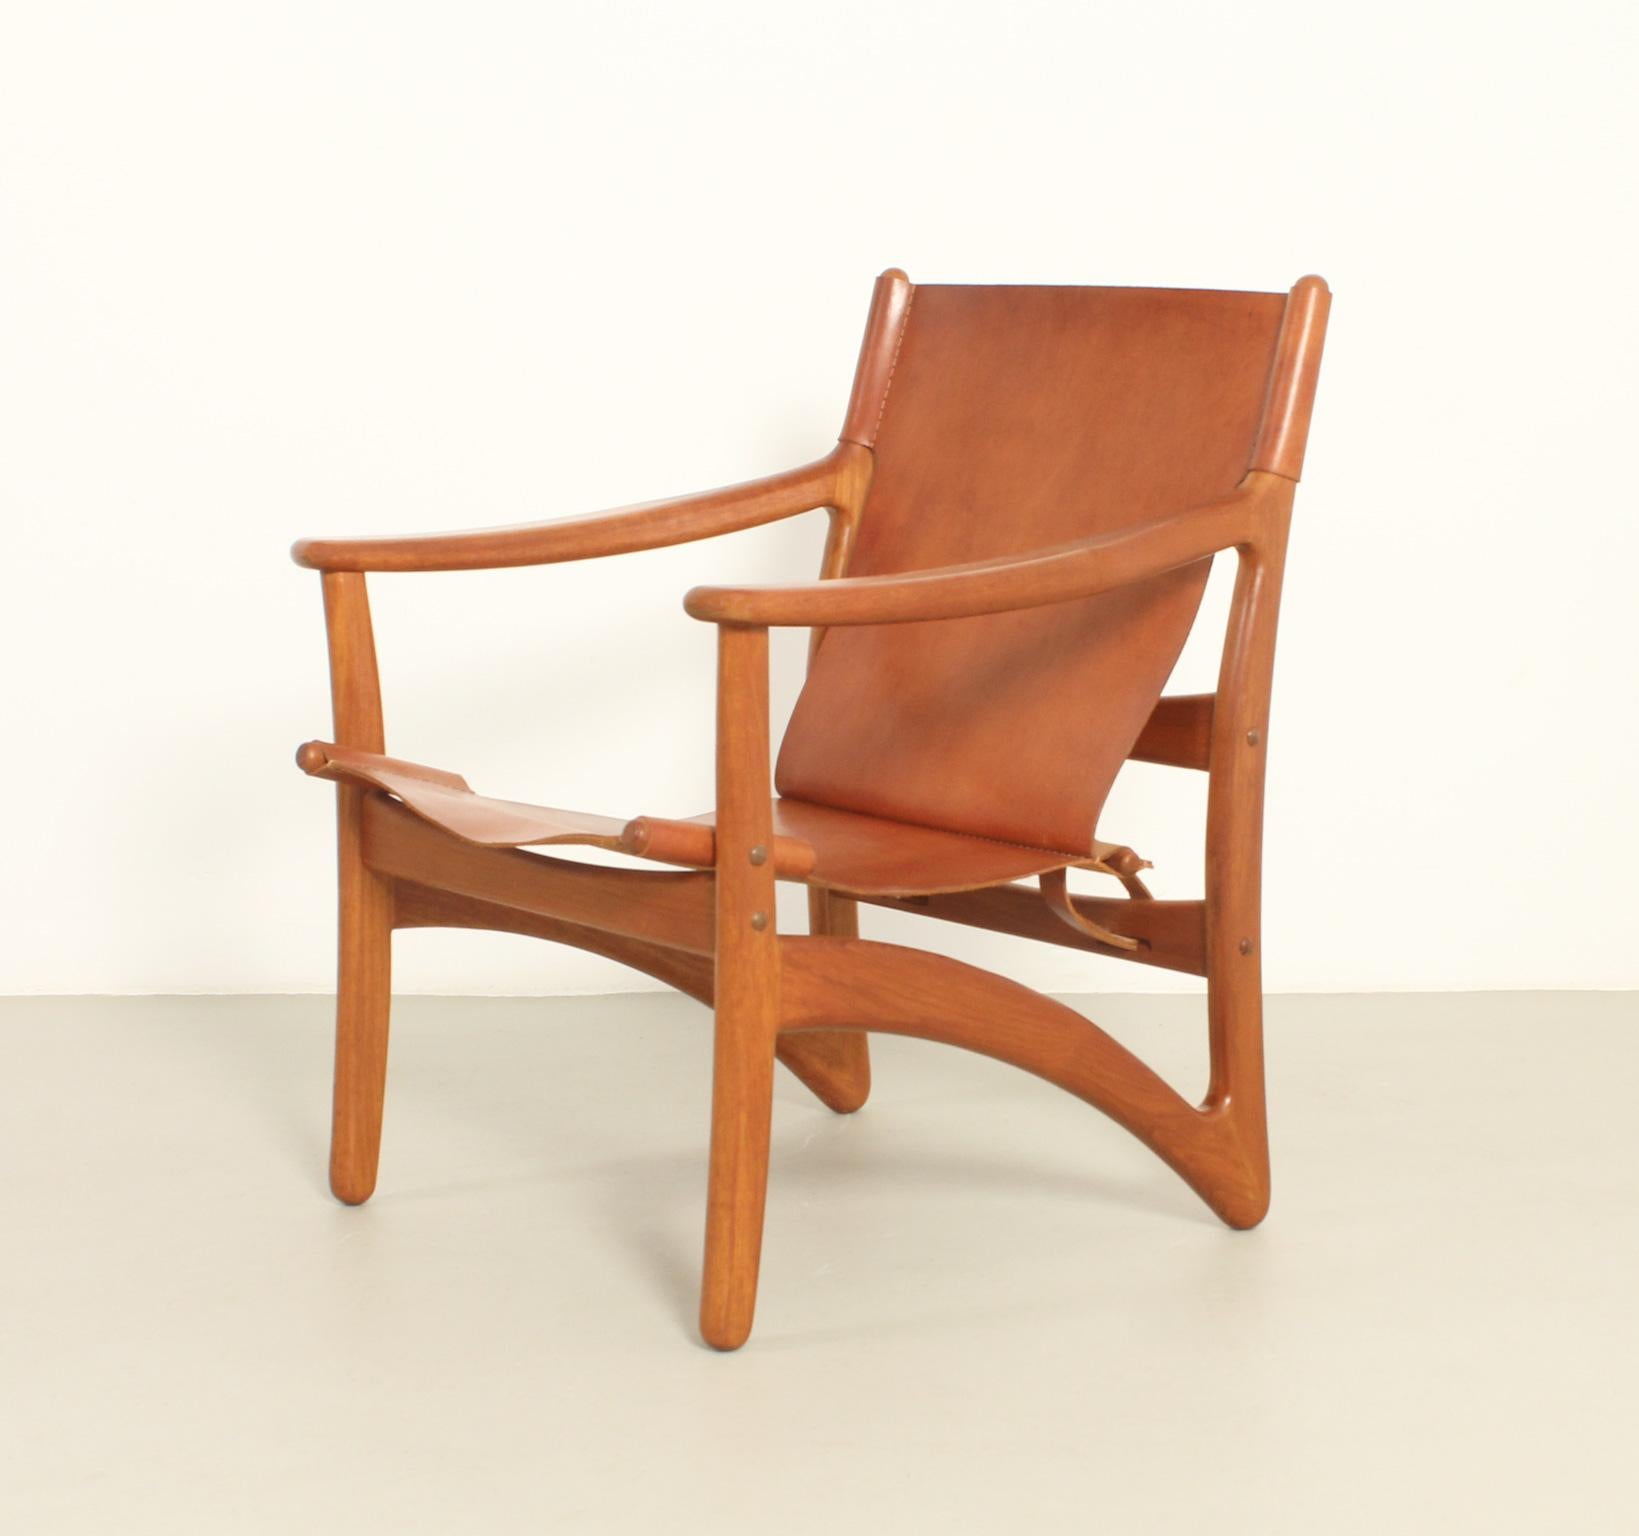 Pegasus lounge chair designed by Arne Vodder for Kircodan, Denmark, 1960's. Solid teak wood with seat and backrest in cognac leather. Signed with producer's plate.